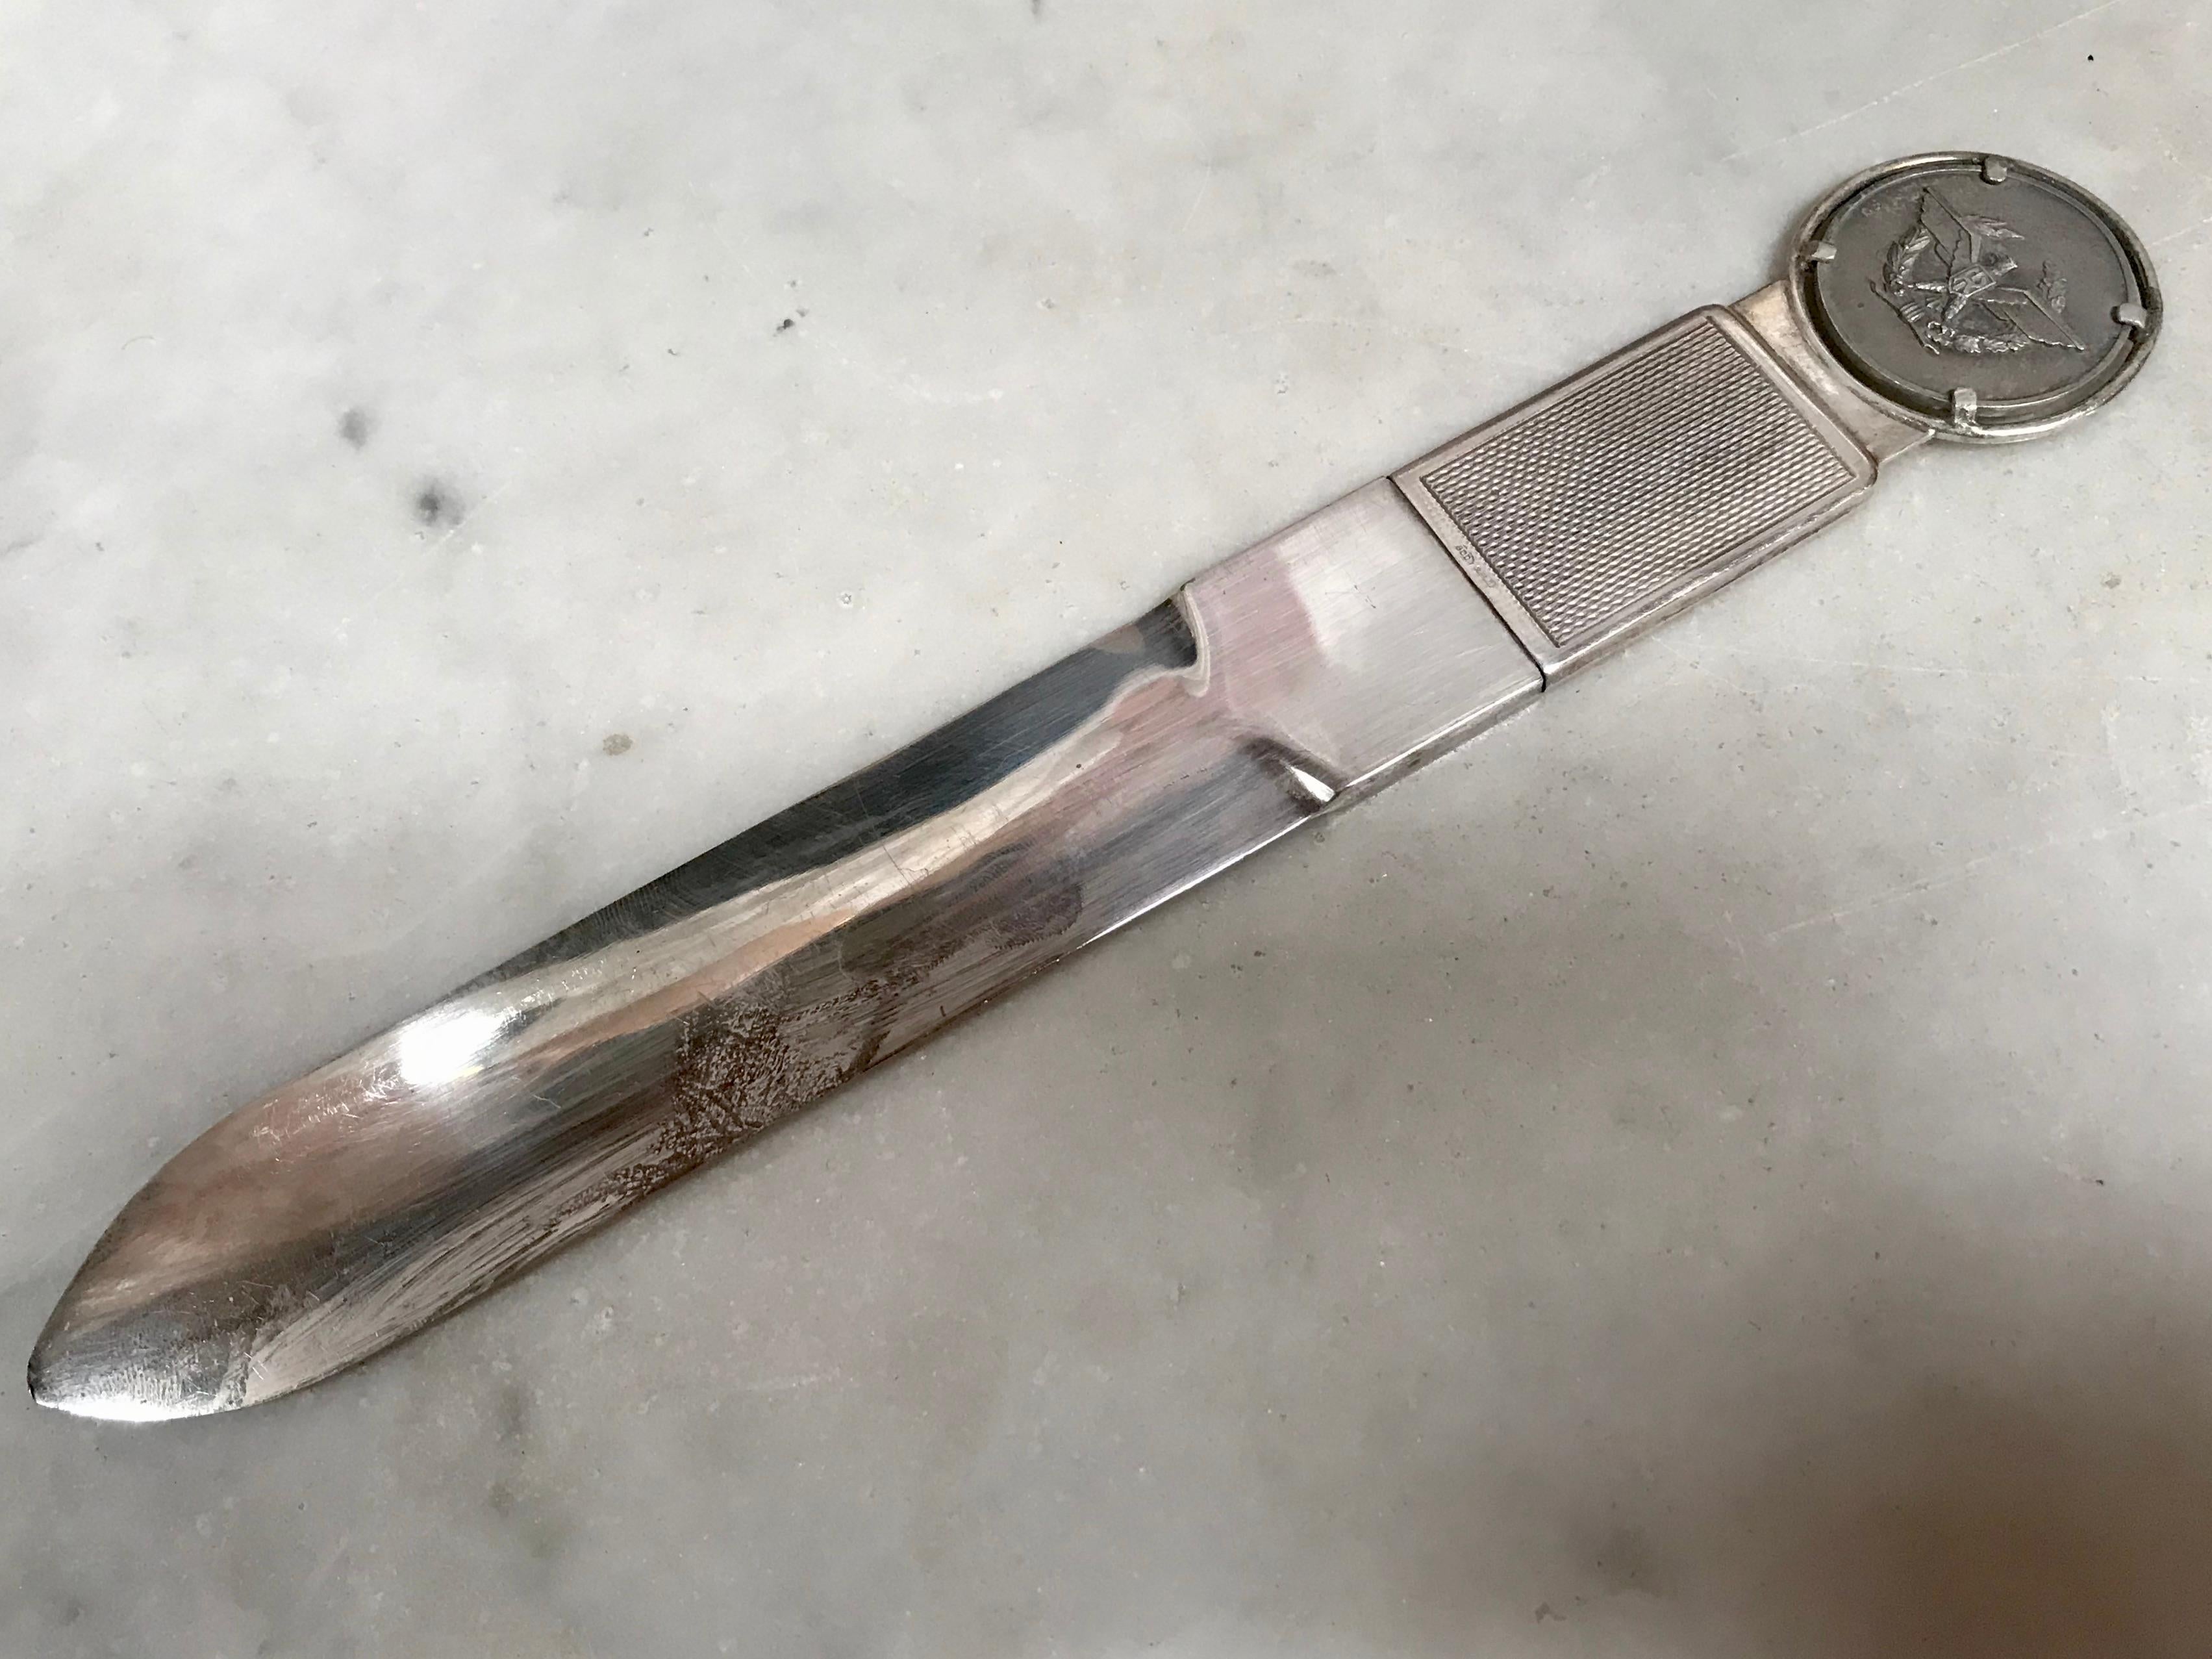 A rare Italian silver letter opener with the medallion with the eagle emblem of the Italian army and the engraved signature of Capo di Stato Maggiore. Made in Italy. A unique addition to many desks, 1970s.